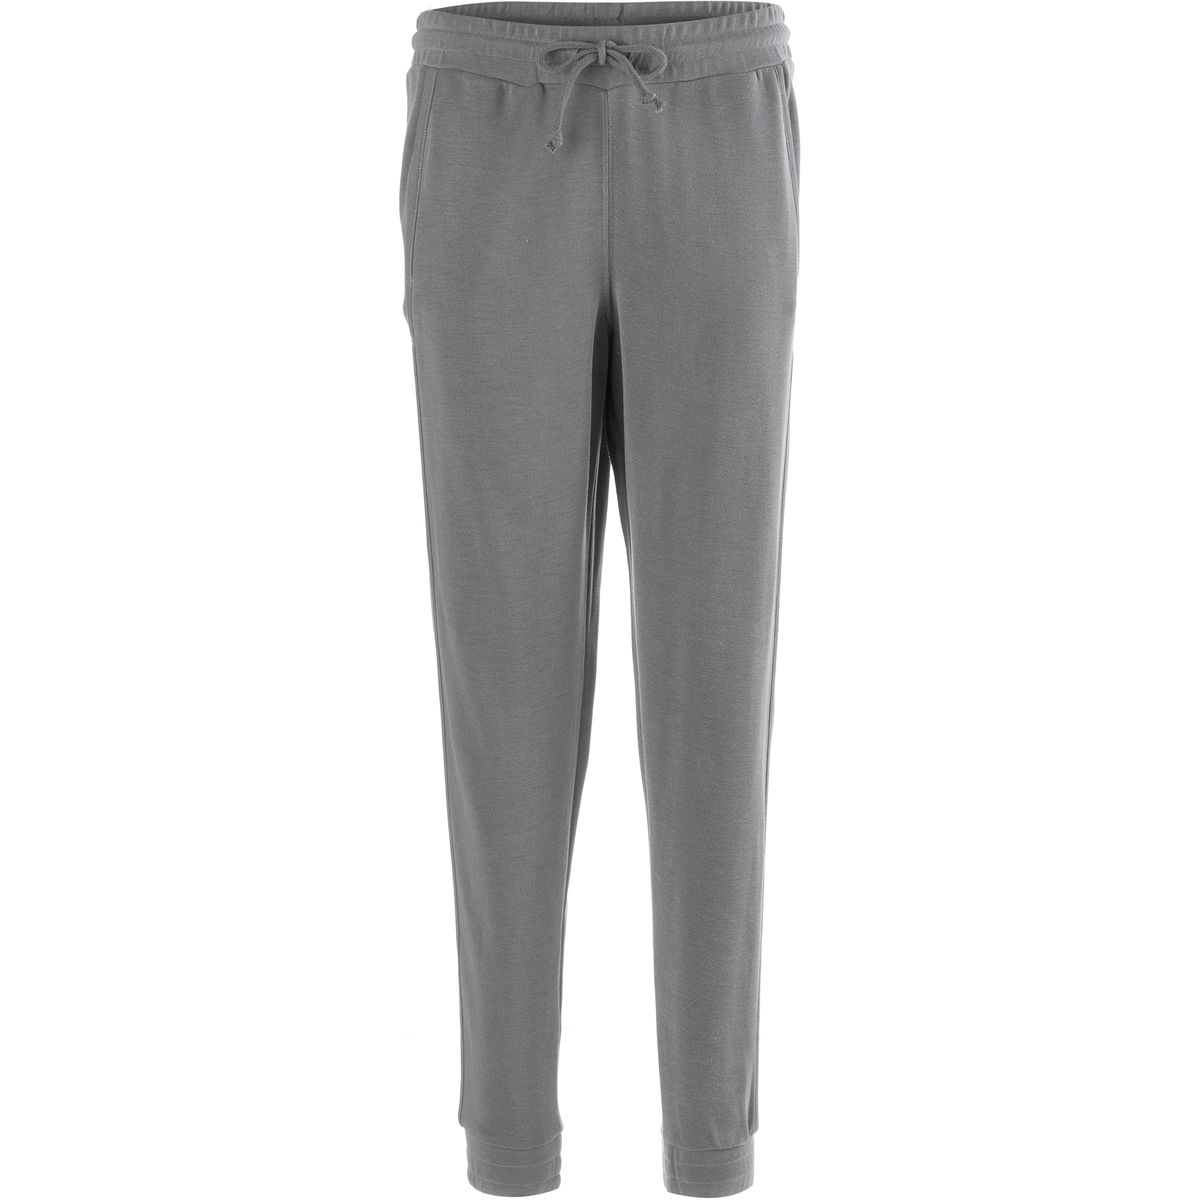 Free People Movement Back Into It Jogger Pant - Women's 